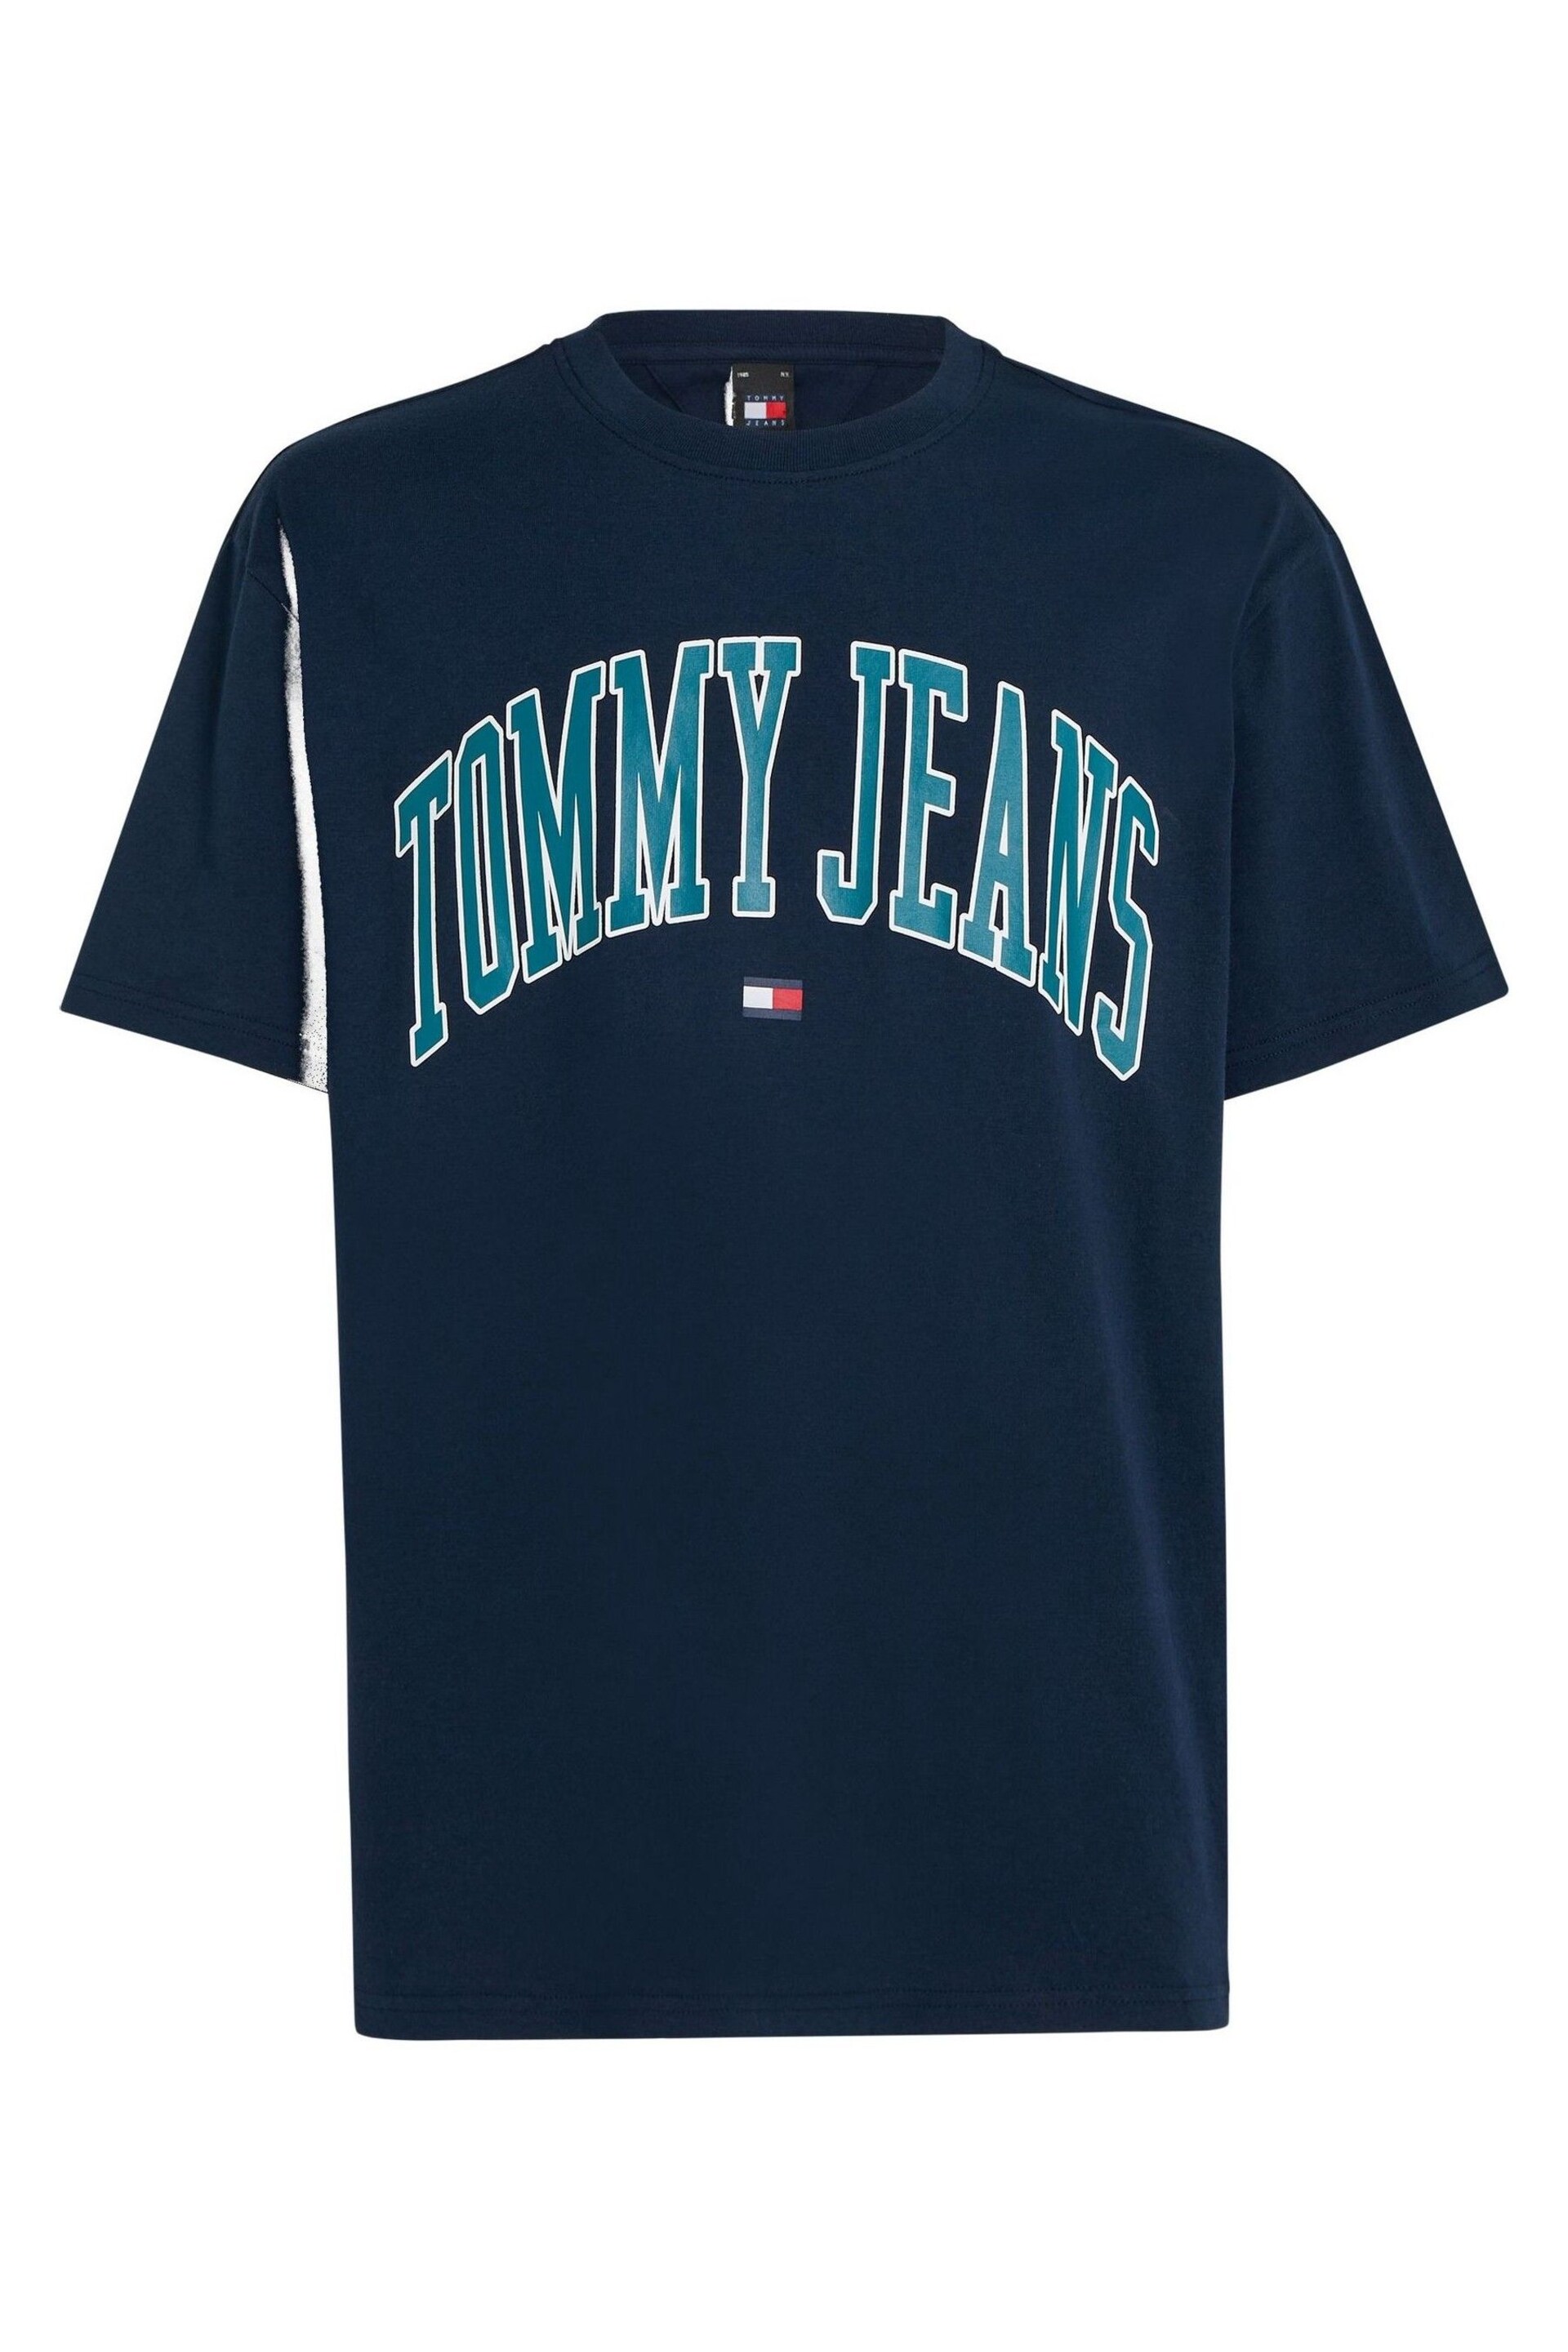 Tommy Jeans Varsity T-Shirt - Image 4 of 6